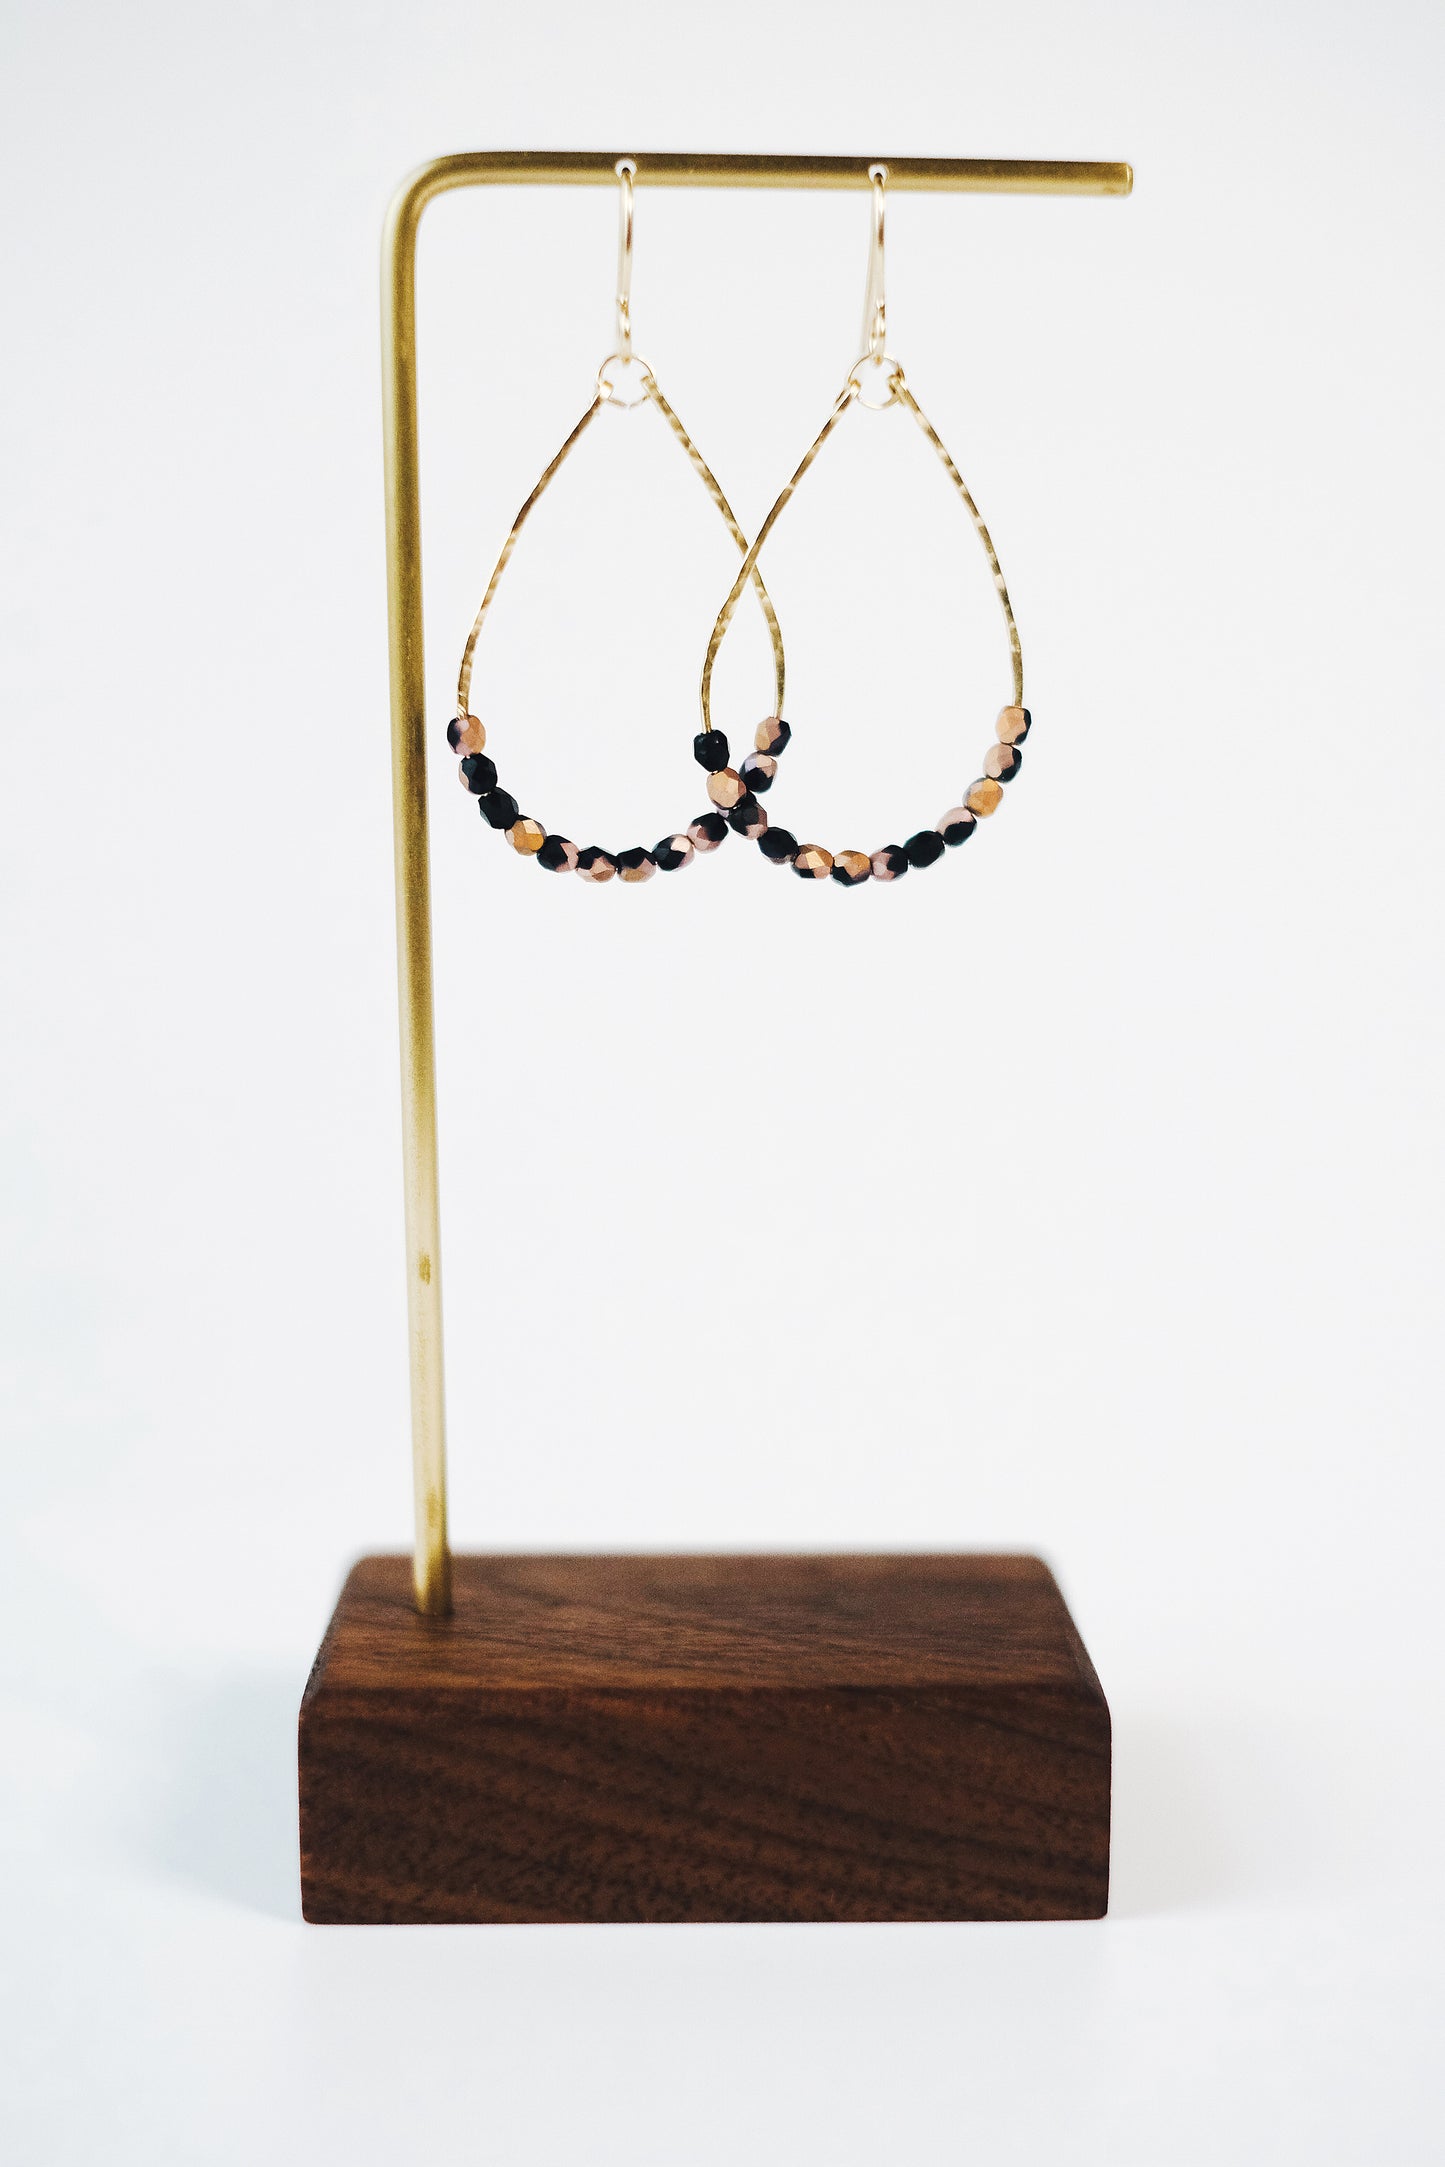 Gold wire teardrop shaped dangle earrings, strung with 12 black and pink speckled faceted glass beads that rest at the bottom of the teardrop shape, hanging from a gold earring hanger with a wooden base..